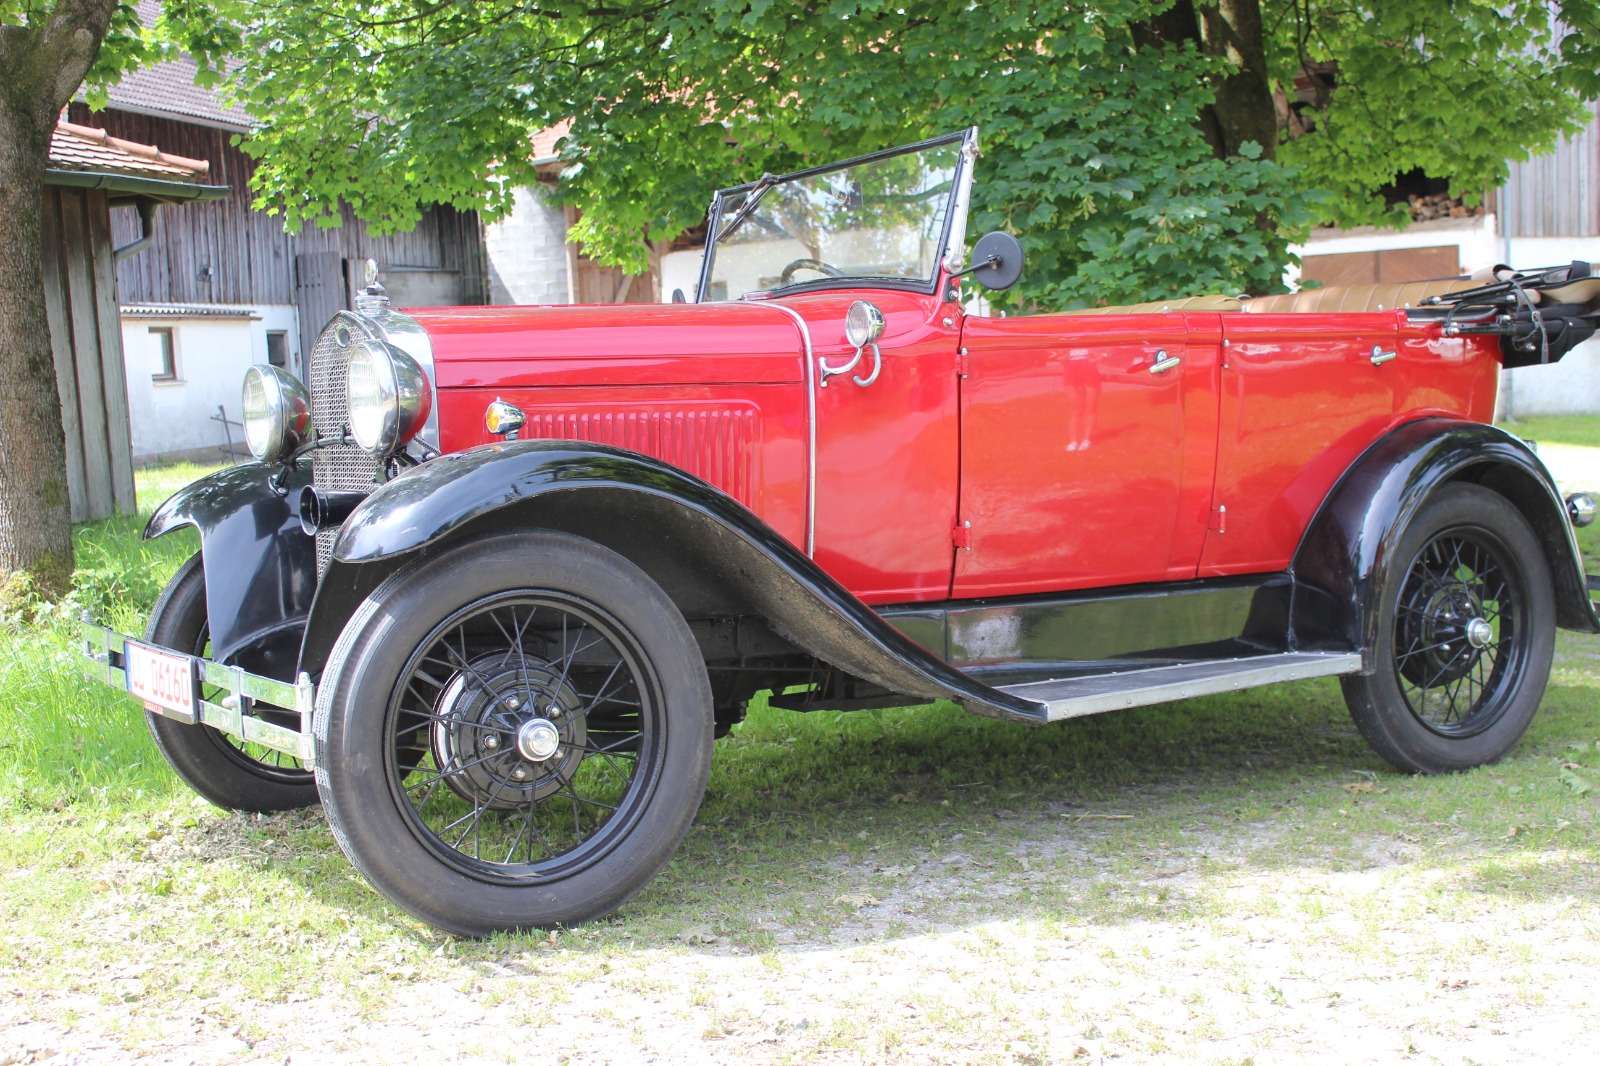 Ford A Phaeton, constructed in 1930, 1498 ccm, 4 cylinders - Germany